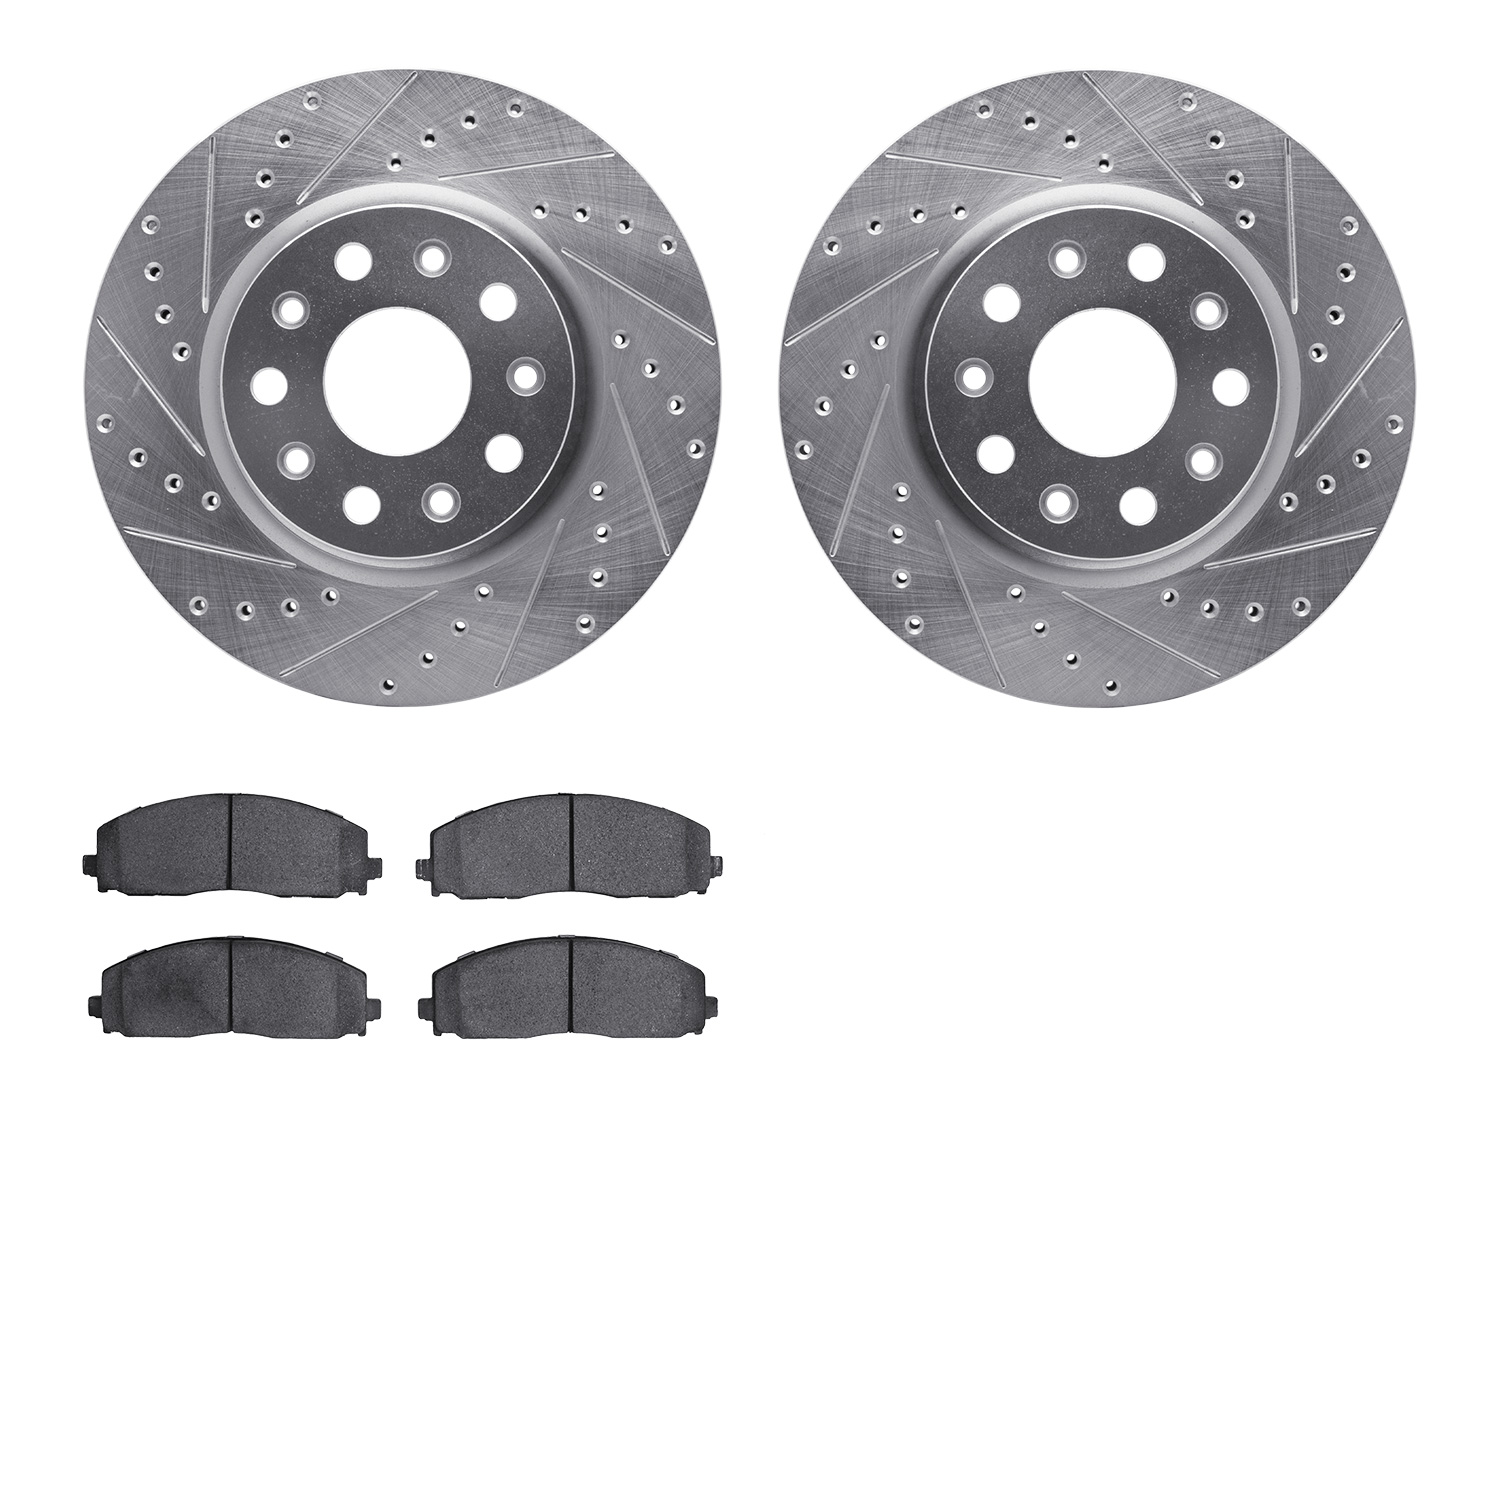 7402-42041 Drilled/Slotted Brake Rotors with Ultimate-Duty Brake Pads Kit [Silver], Fits Select Mopar, Position: Front